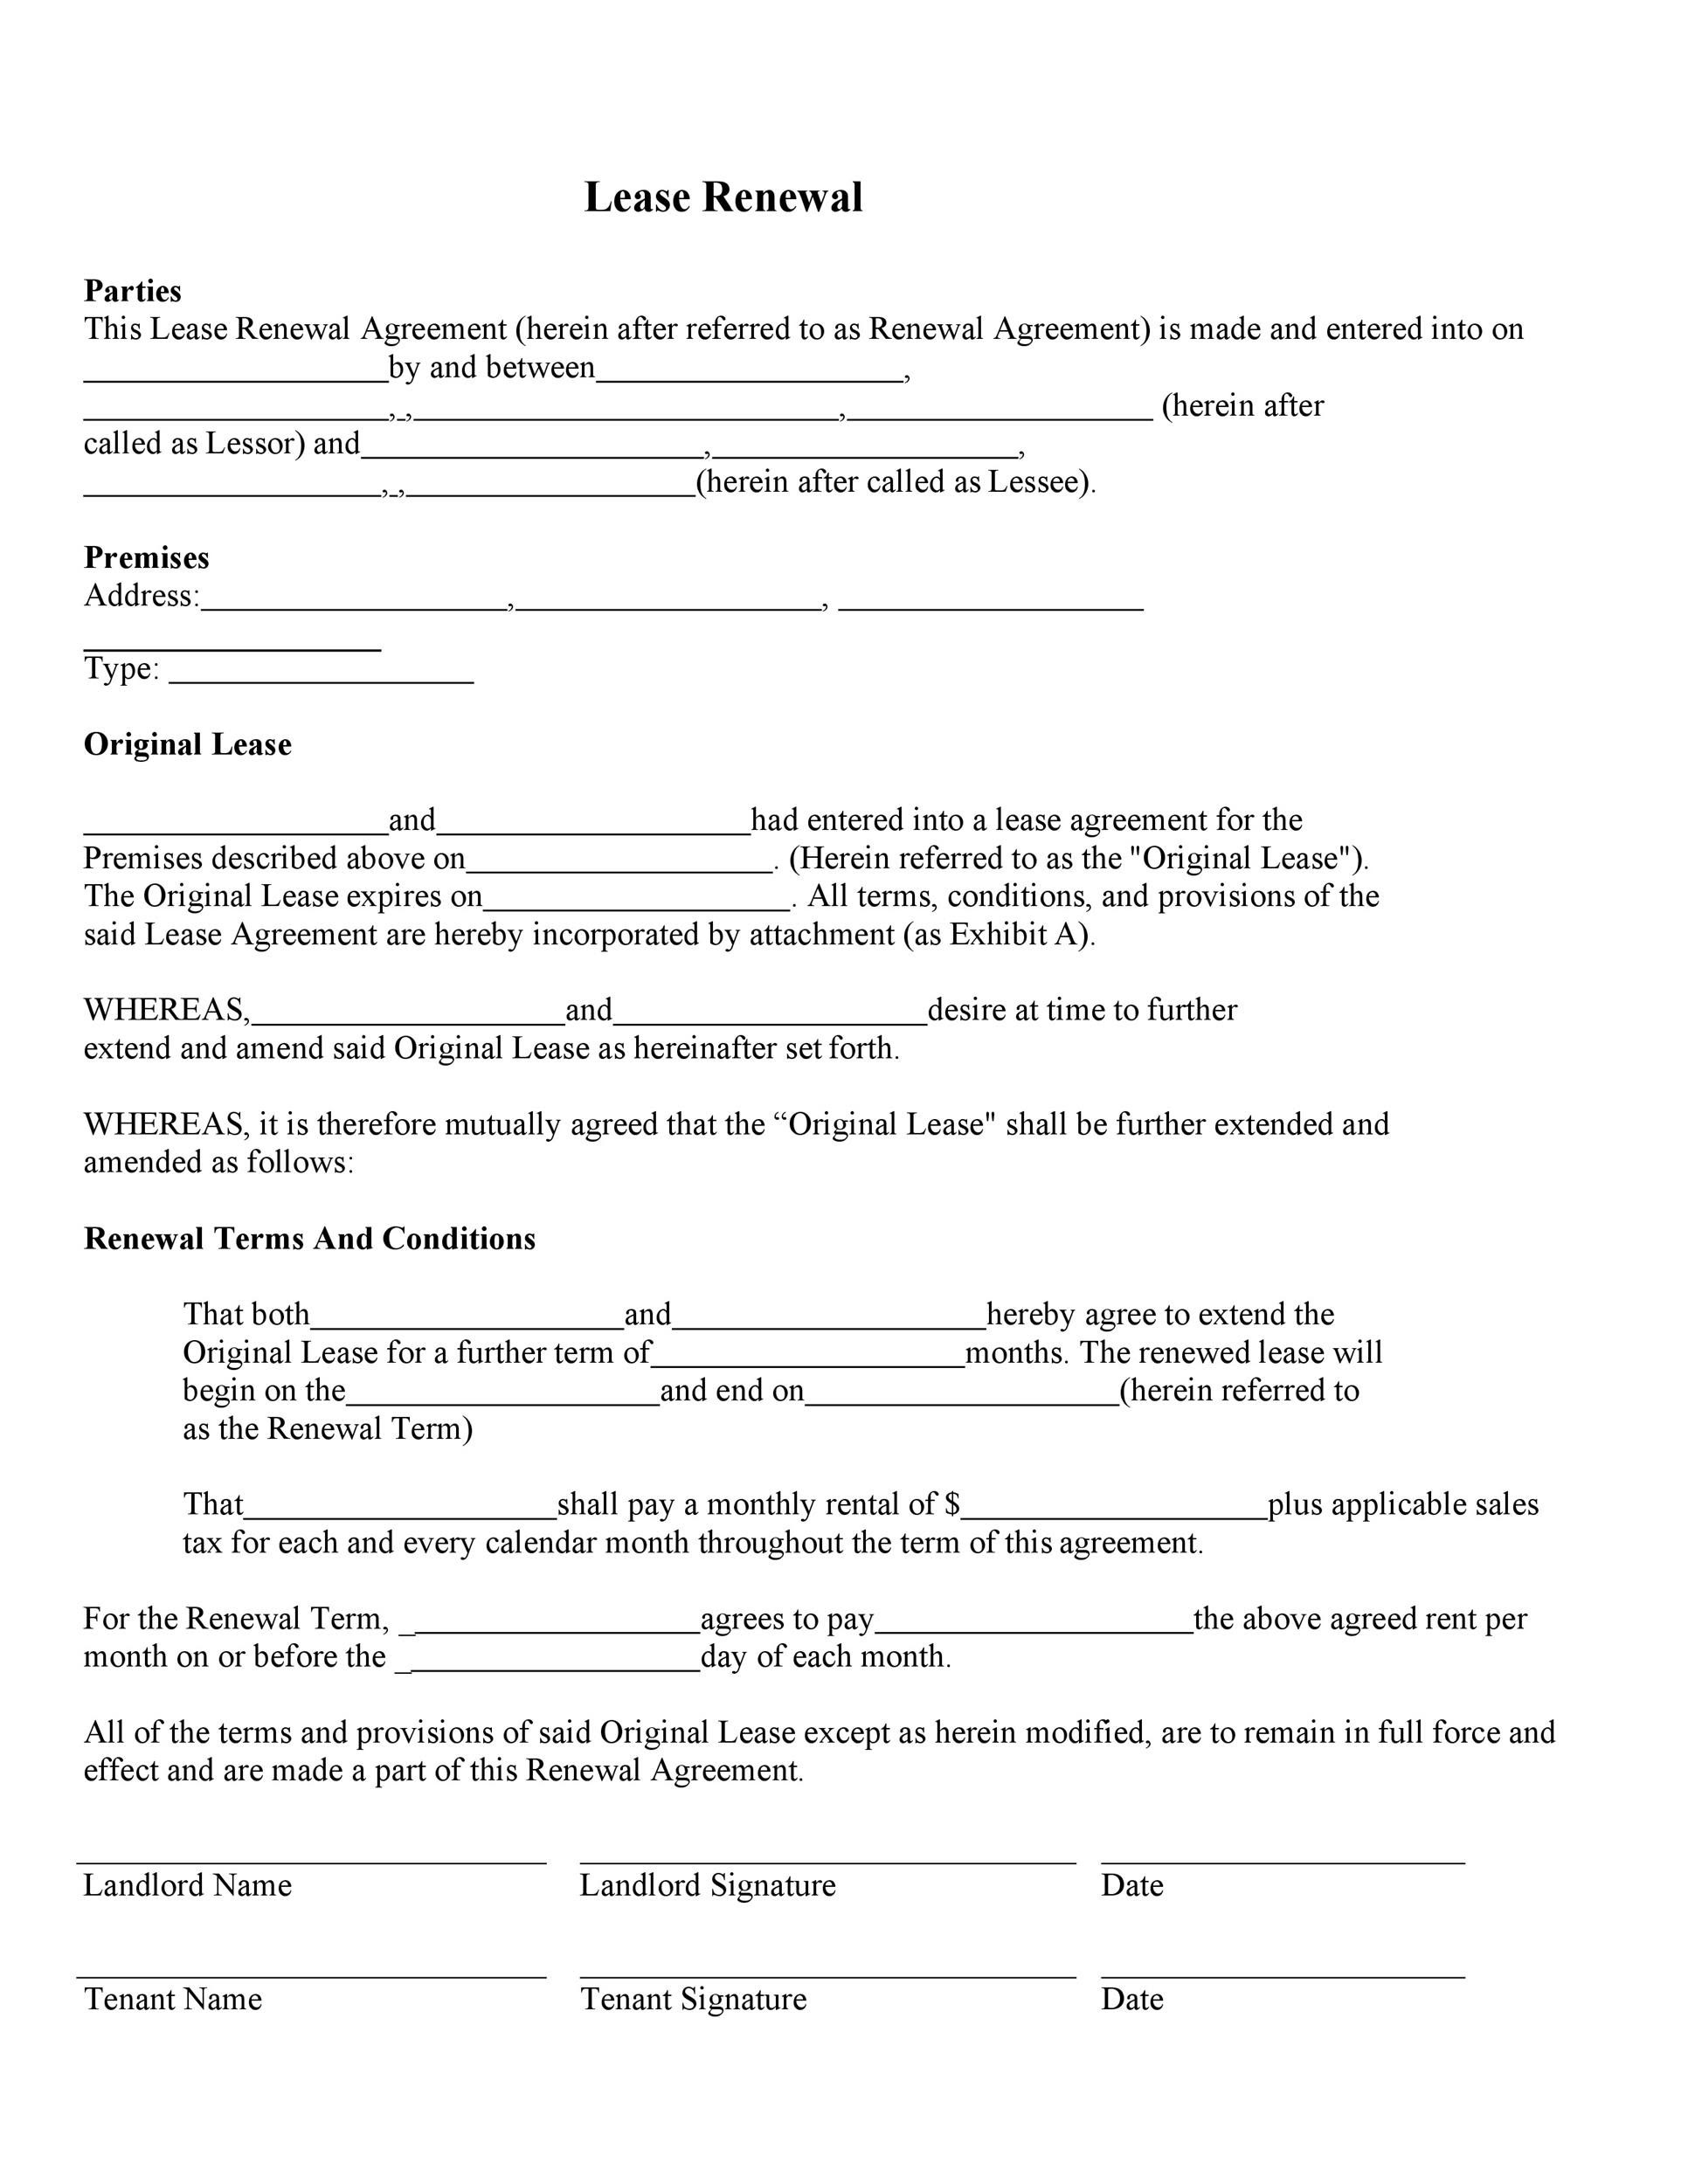 Lease Agreement Extension Letter Sample PDF Template